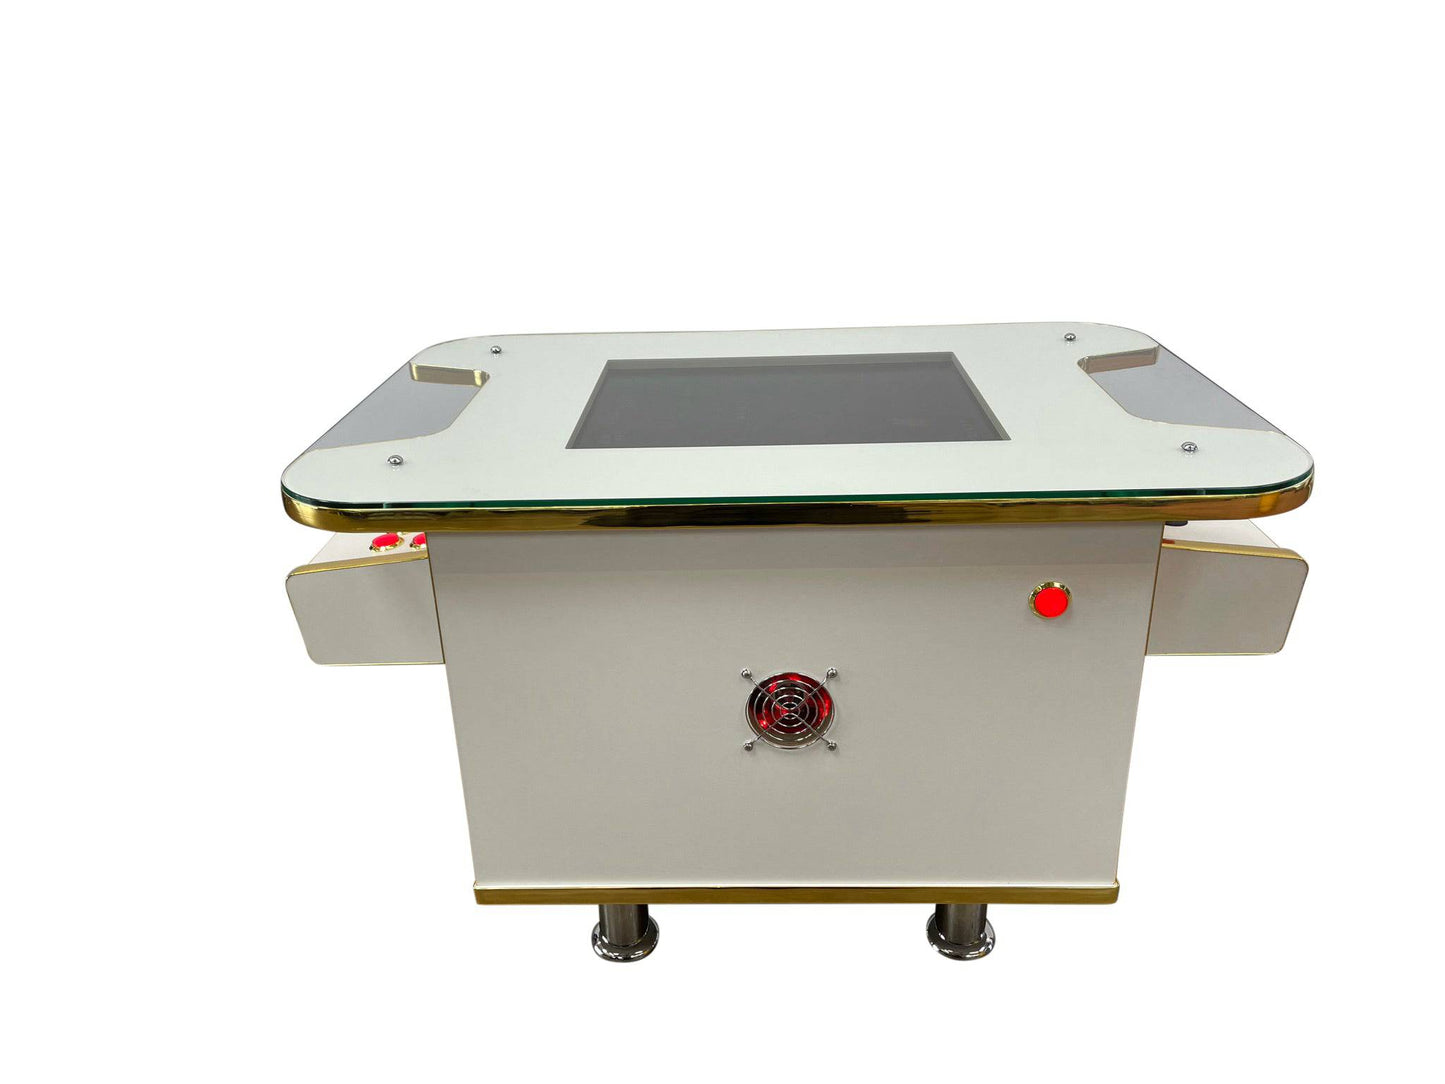 LED Red, Gold and White Arcade Coffee Table - Flatout Arcades